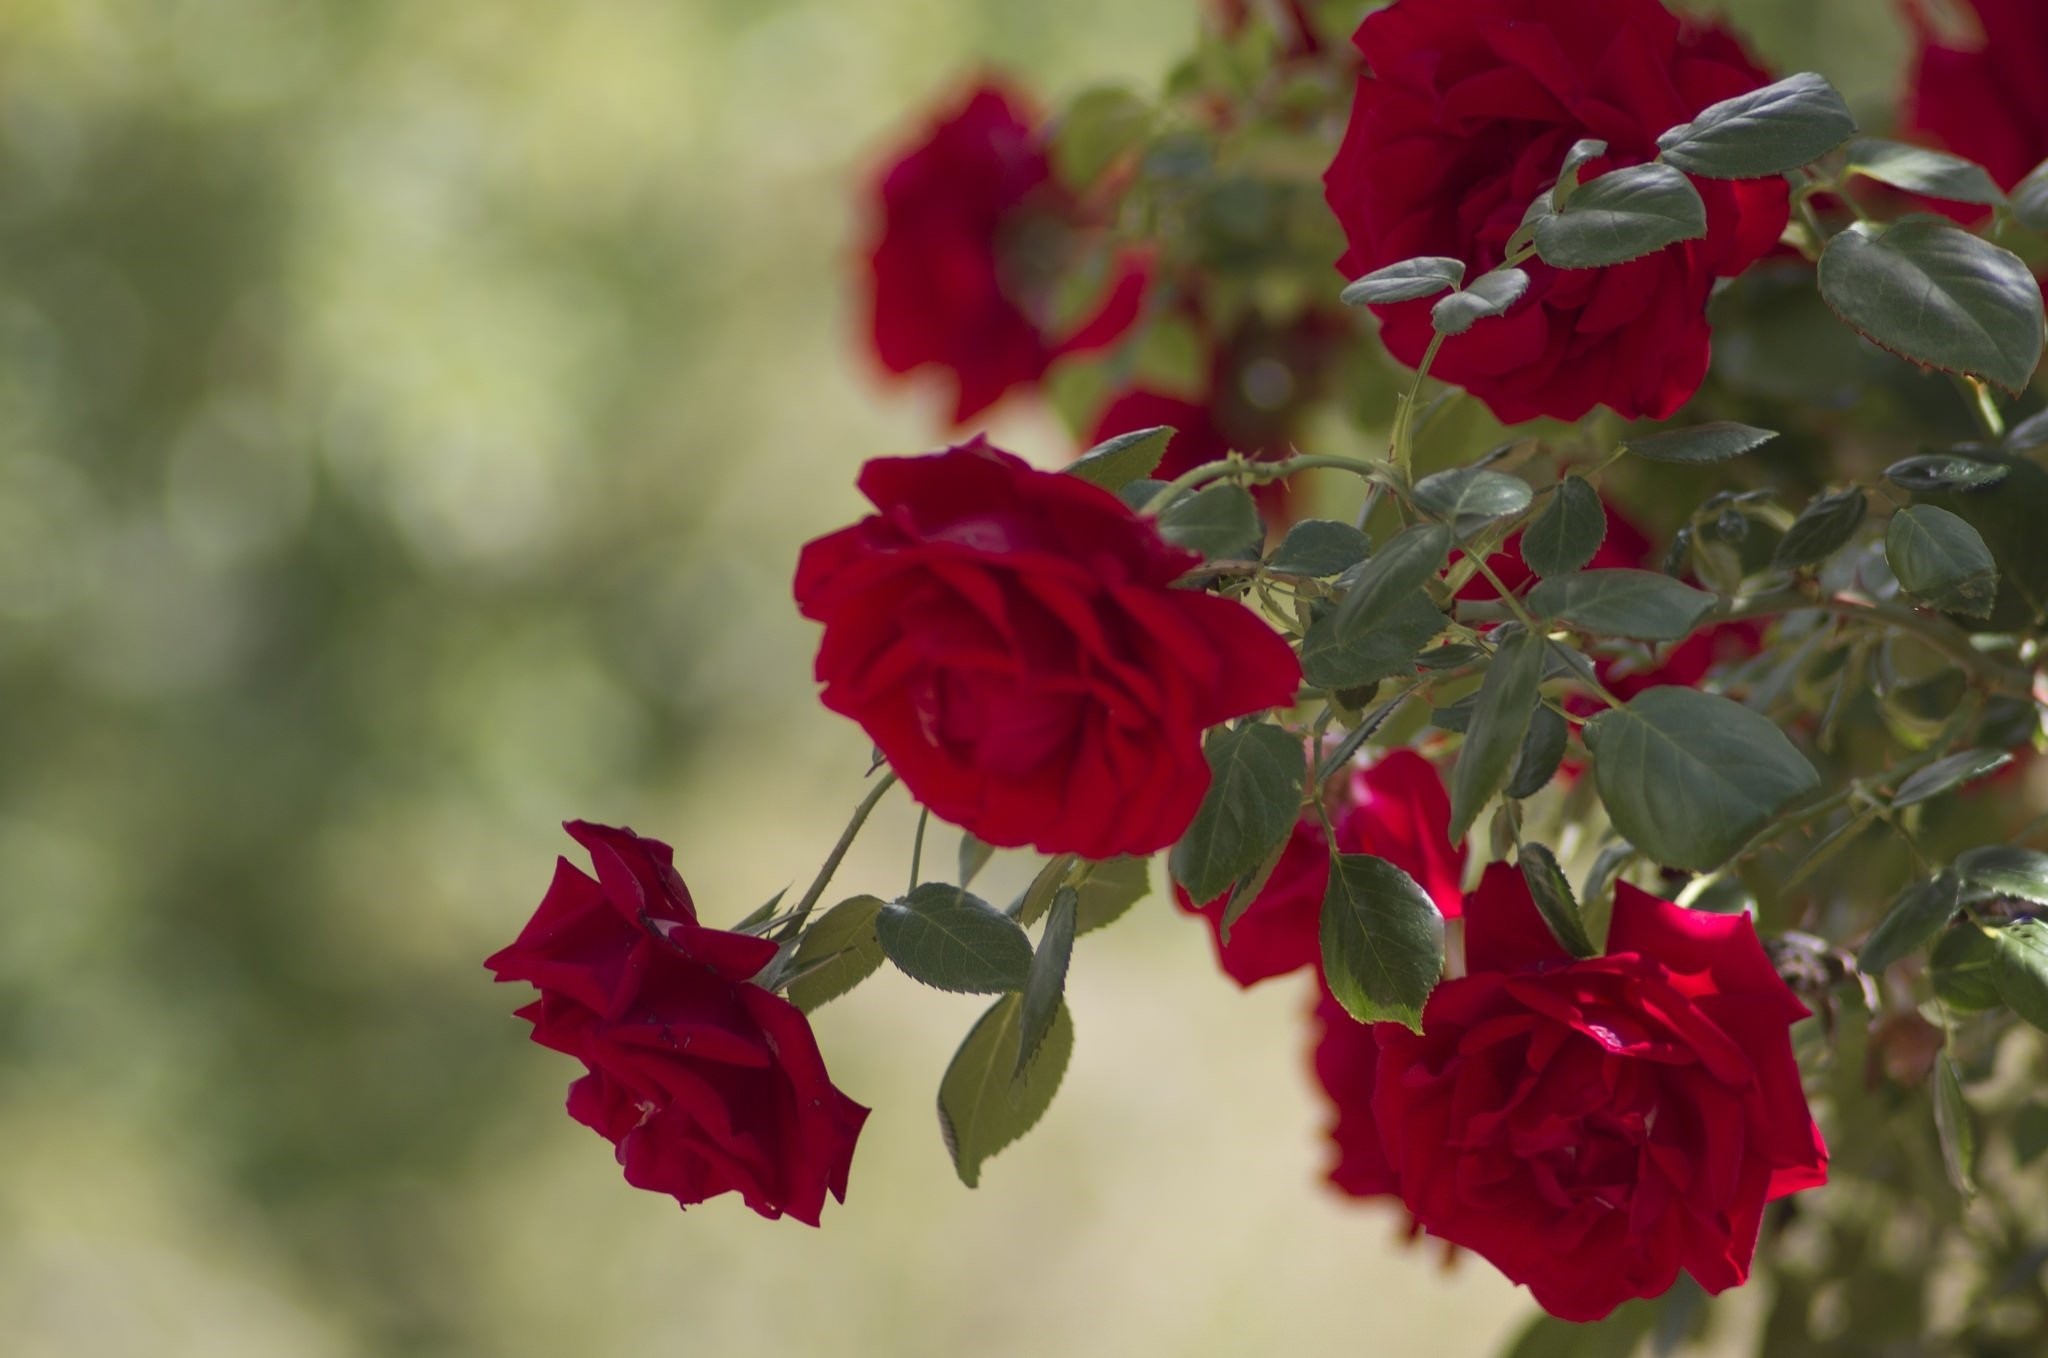 Amazing beauty and health benefits of roses